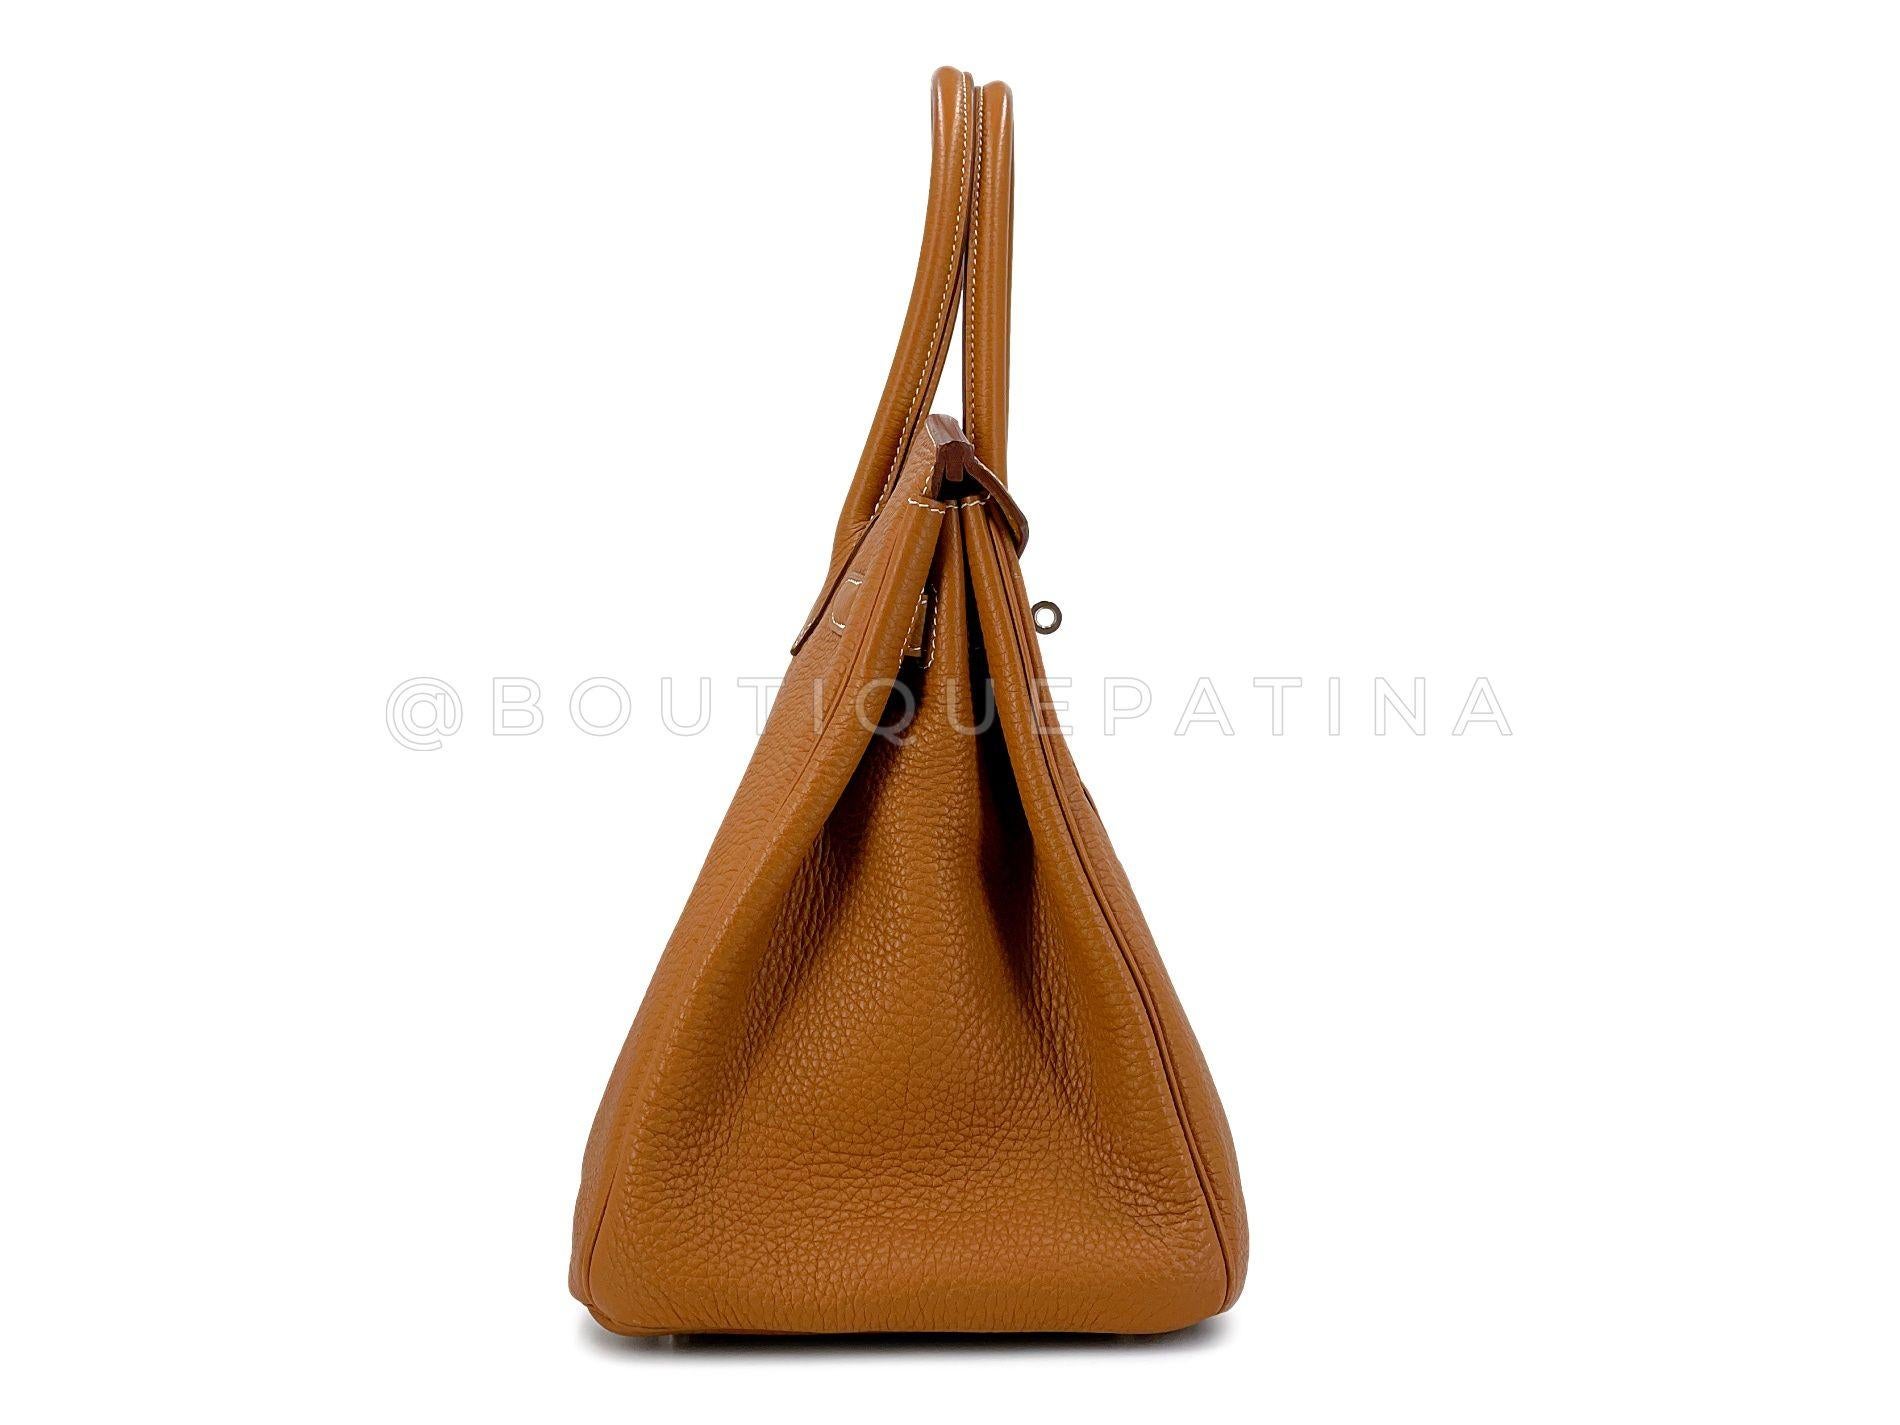 Hermès Gold Togo Birkin Tote Bag 35cm PHW Camel Brown 68060 In Excellent Condition For Sale In Costa Mesa, CA